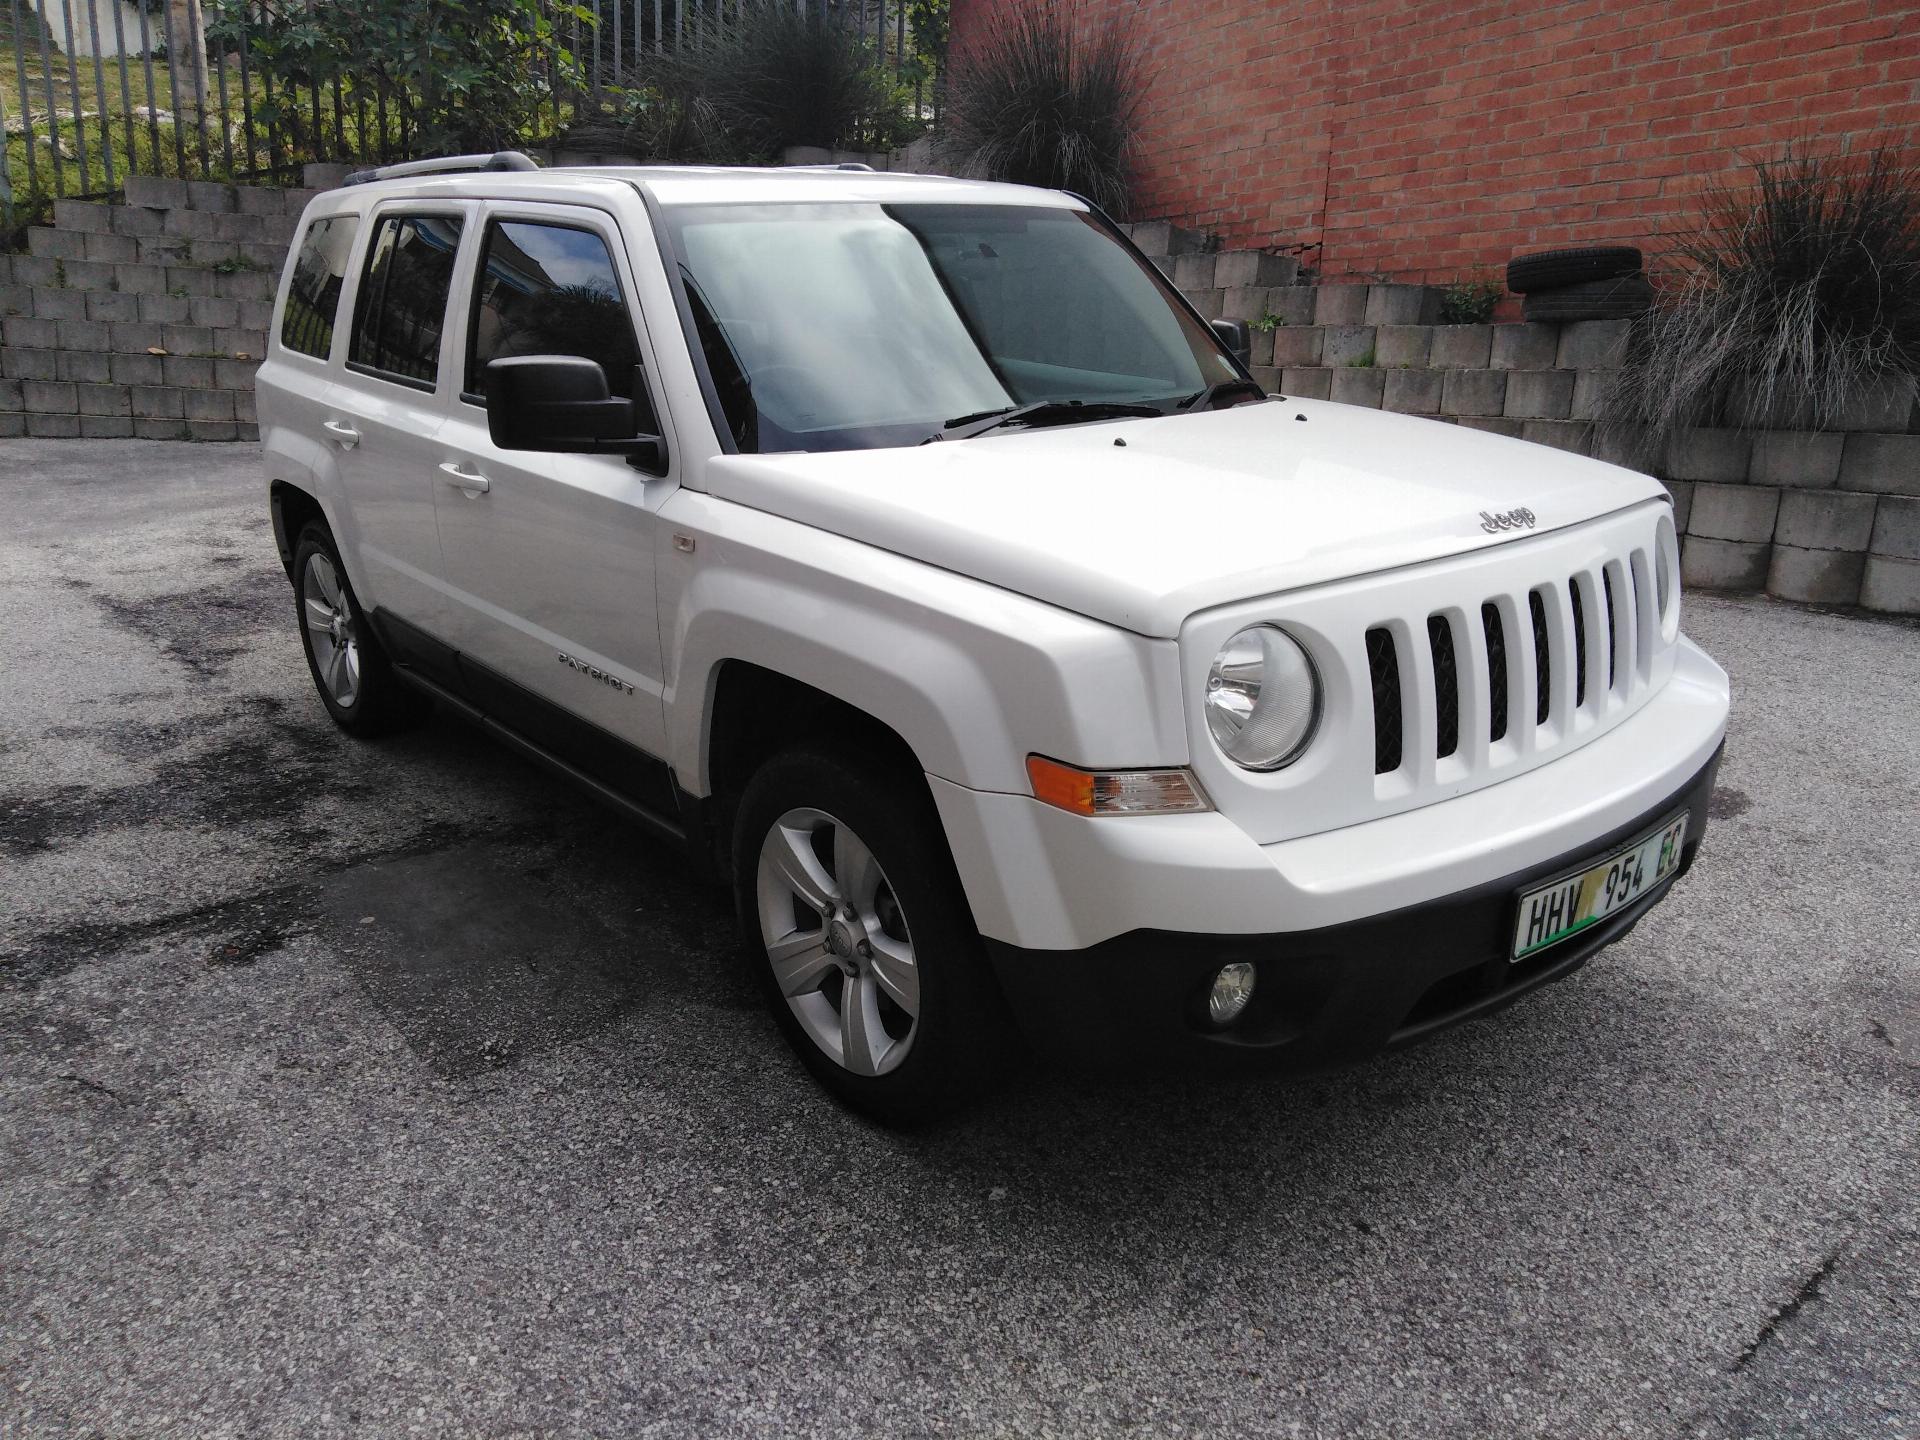 Used Jeep Patriot 2.4 Limited 4X4 2011 on auction PV1027576